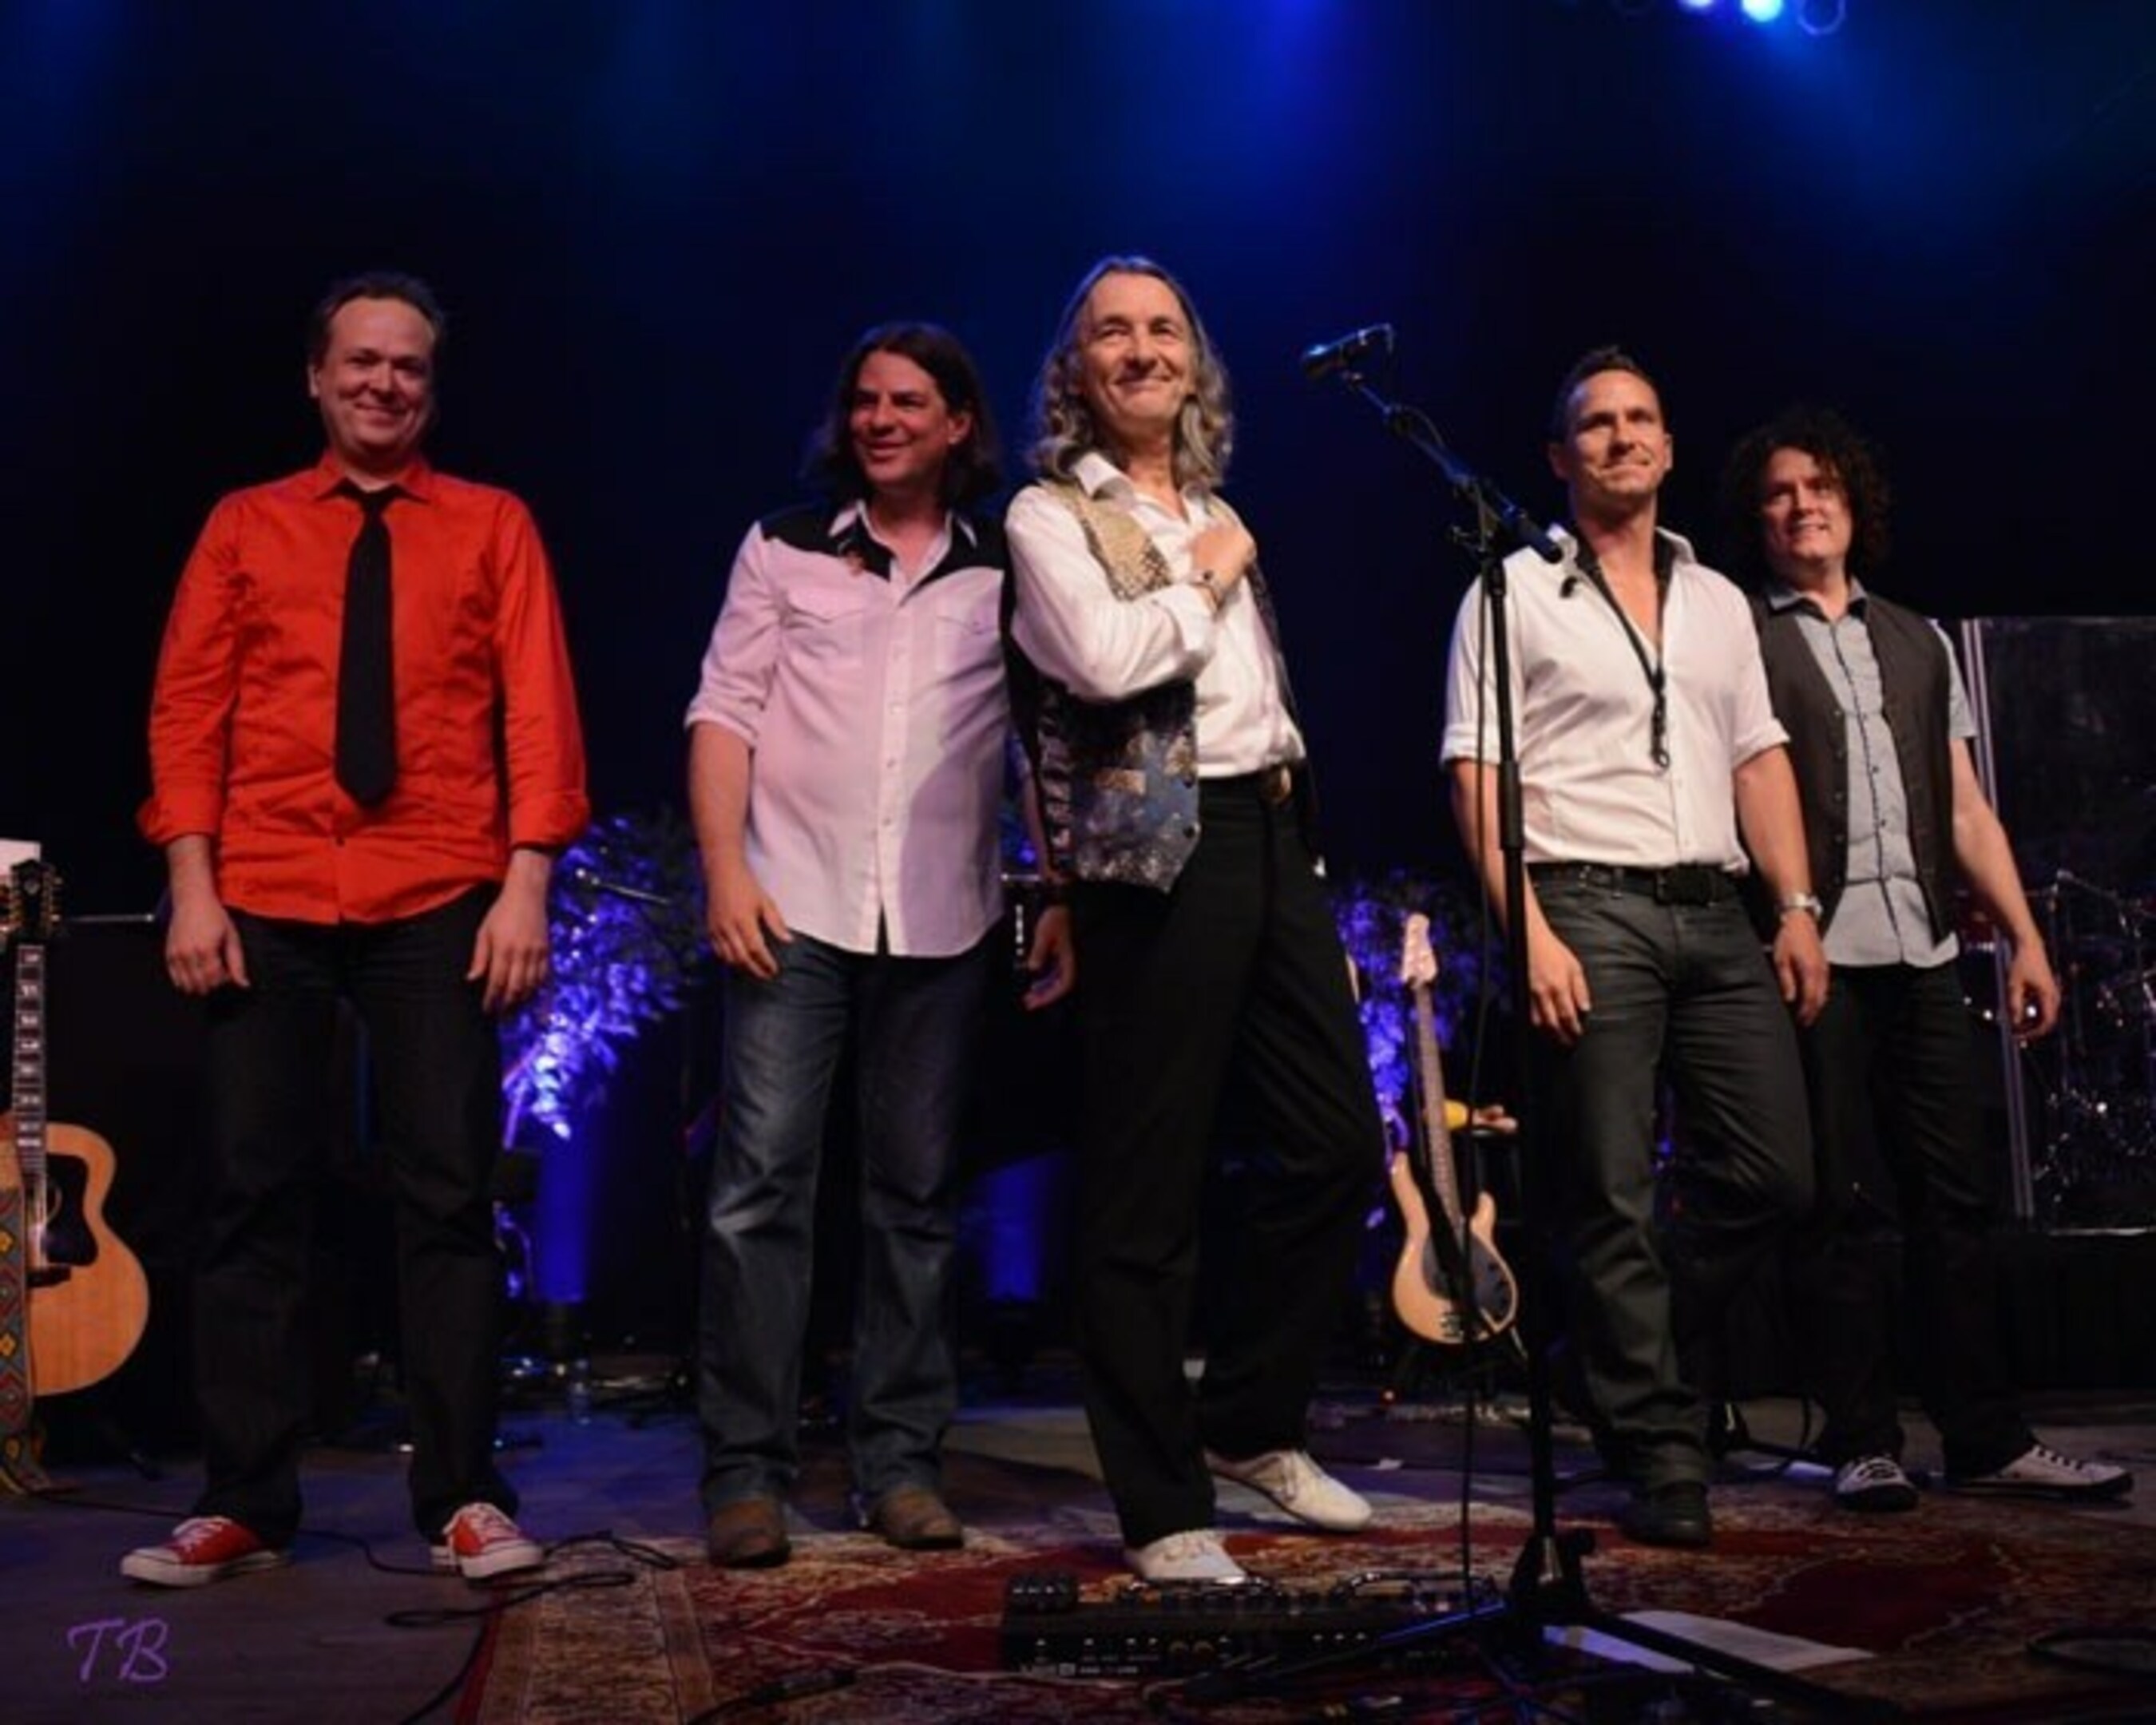 SUPERTRAMP Co-Founder ROGER HODGSON Readies Fall Tour As "Crime of the Century" Celebrates 40th Anniversary